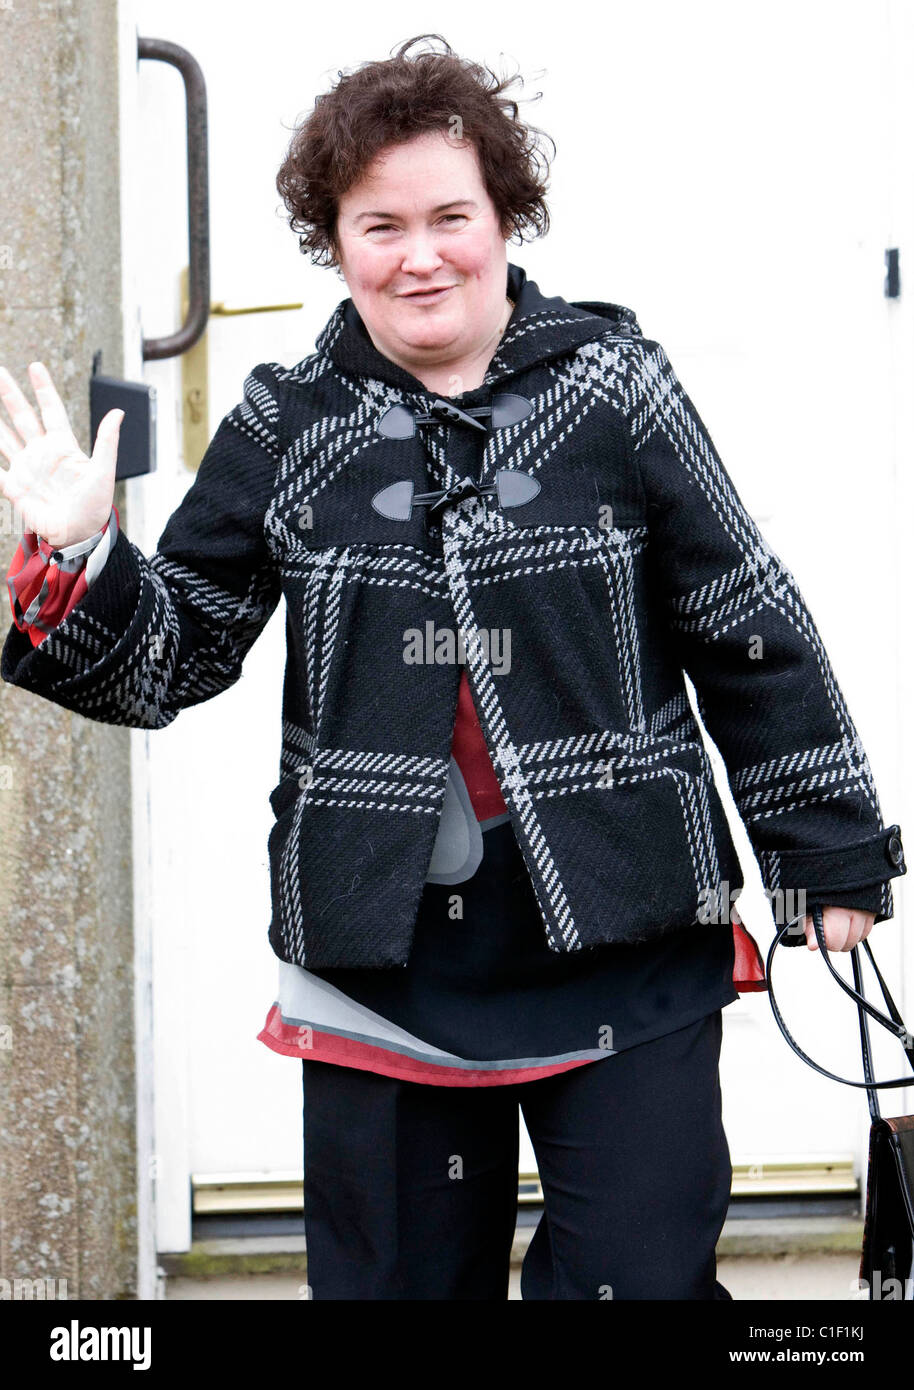 'Britain's Got Talent' phenomenon Susan Boyle in high spirits while leaving her home West Lothian, Scotland - 04.05.09 Stock Photo